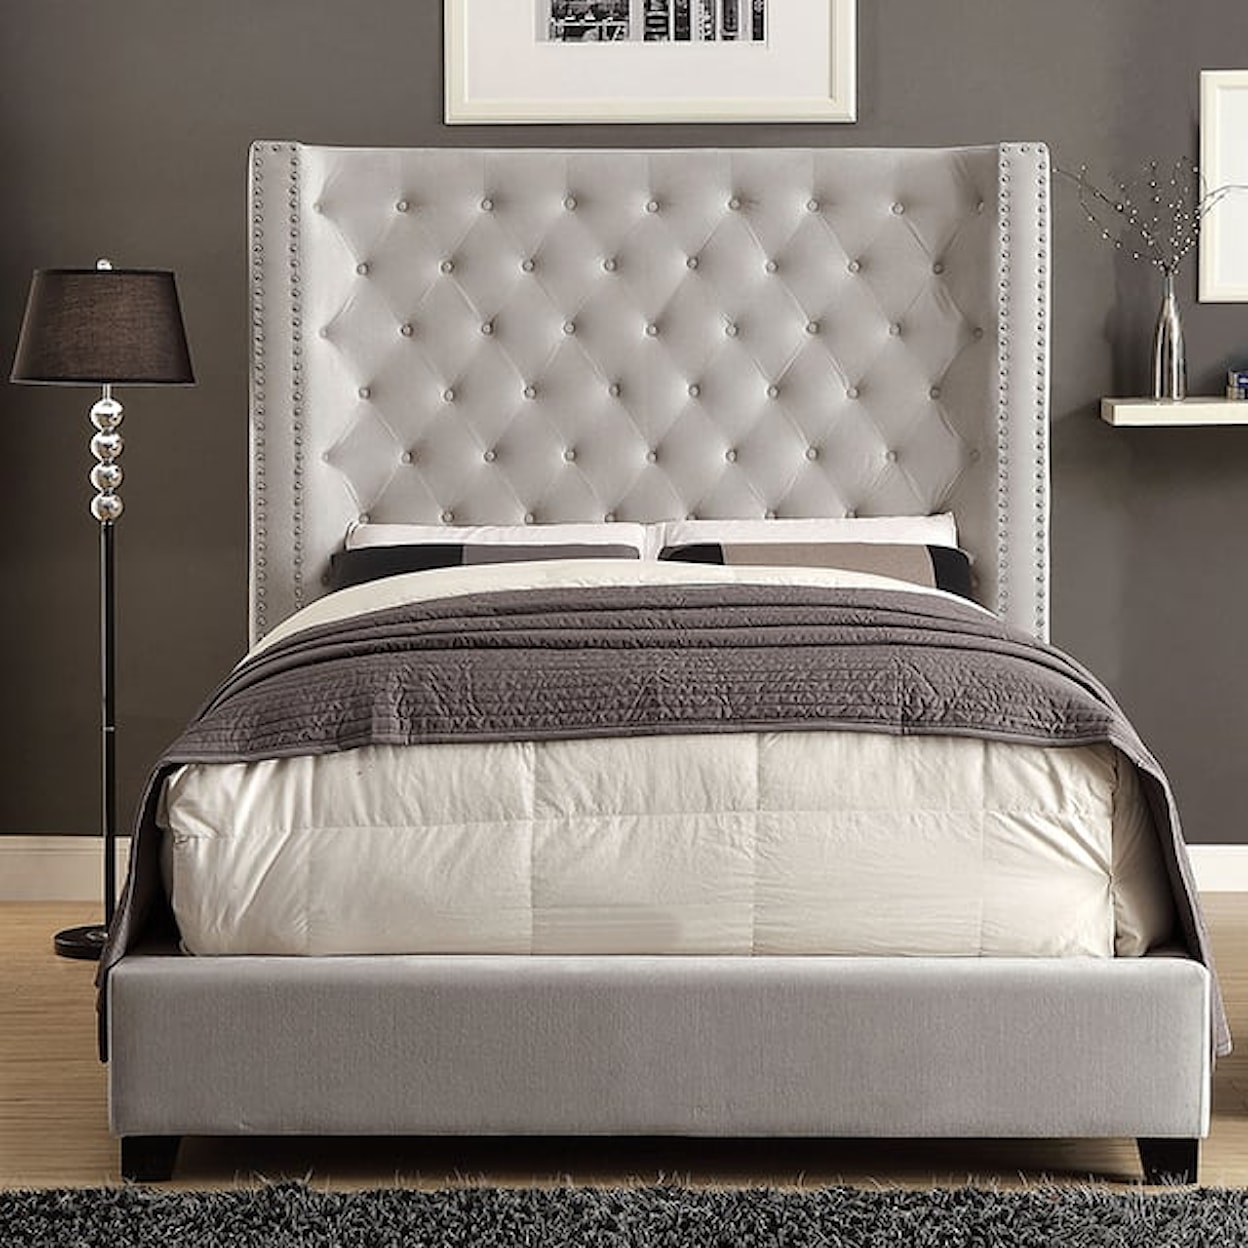 Furniture of America Rosabelle Queen Upholstered Bed